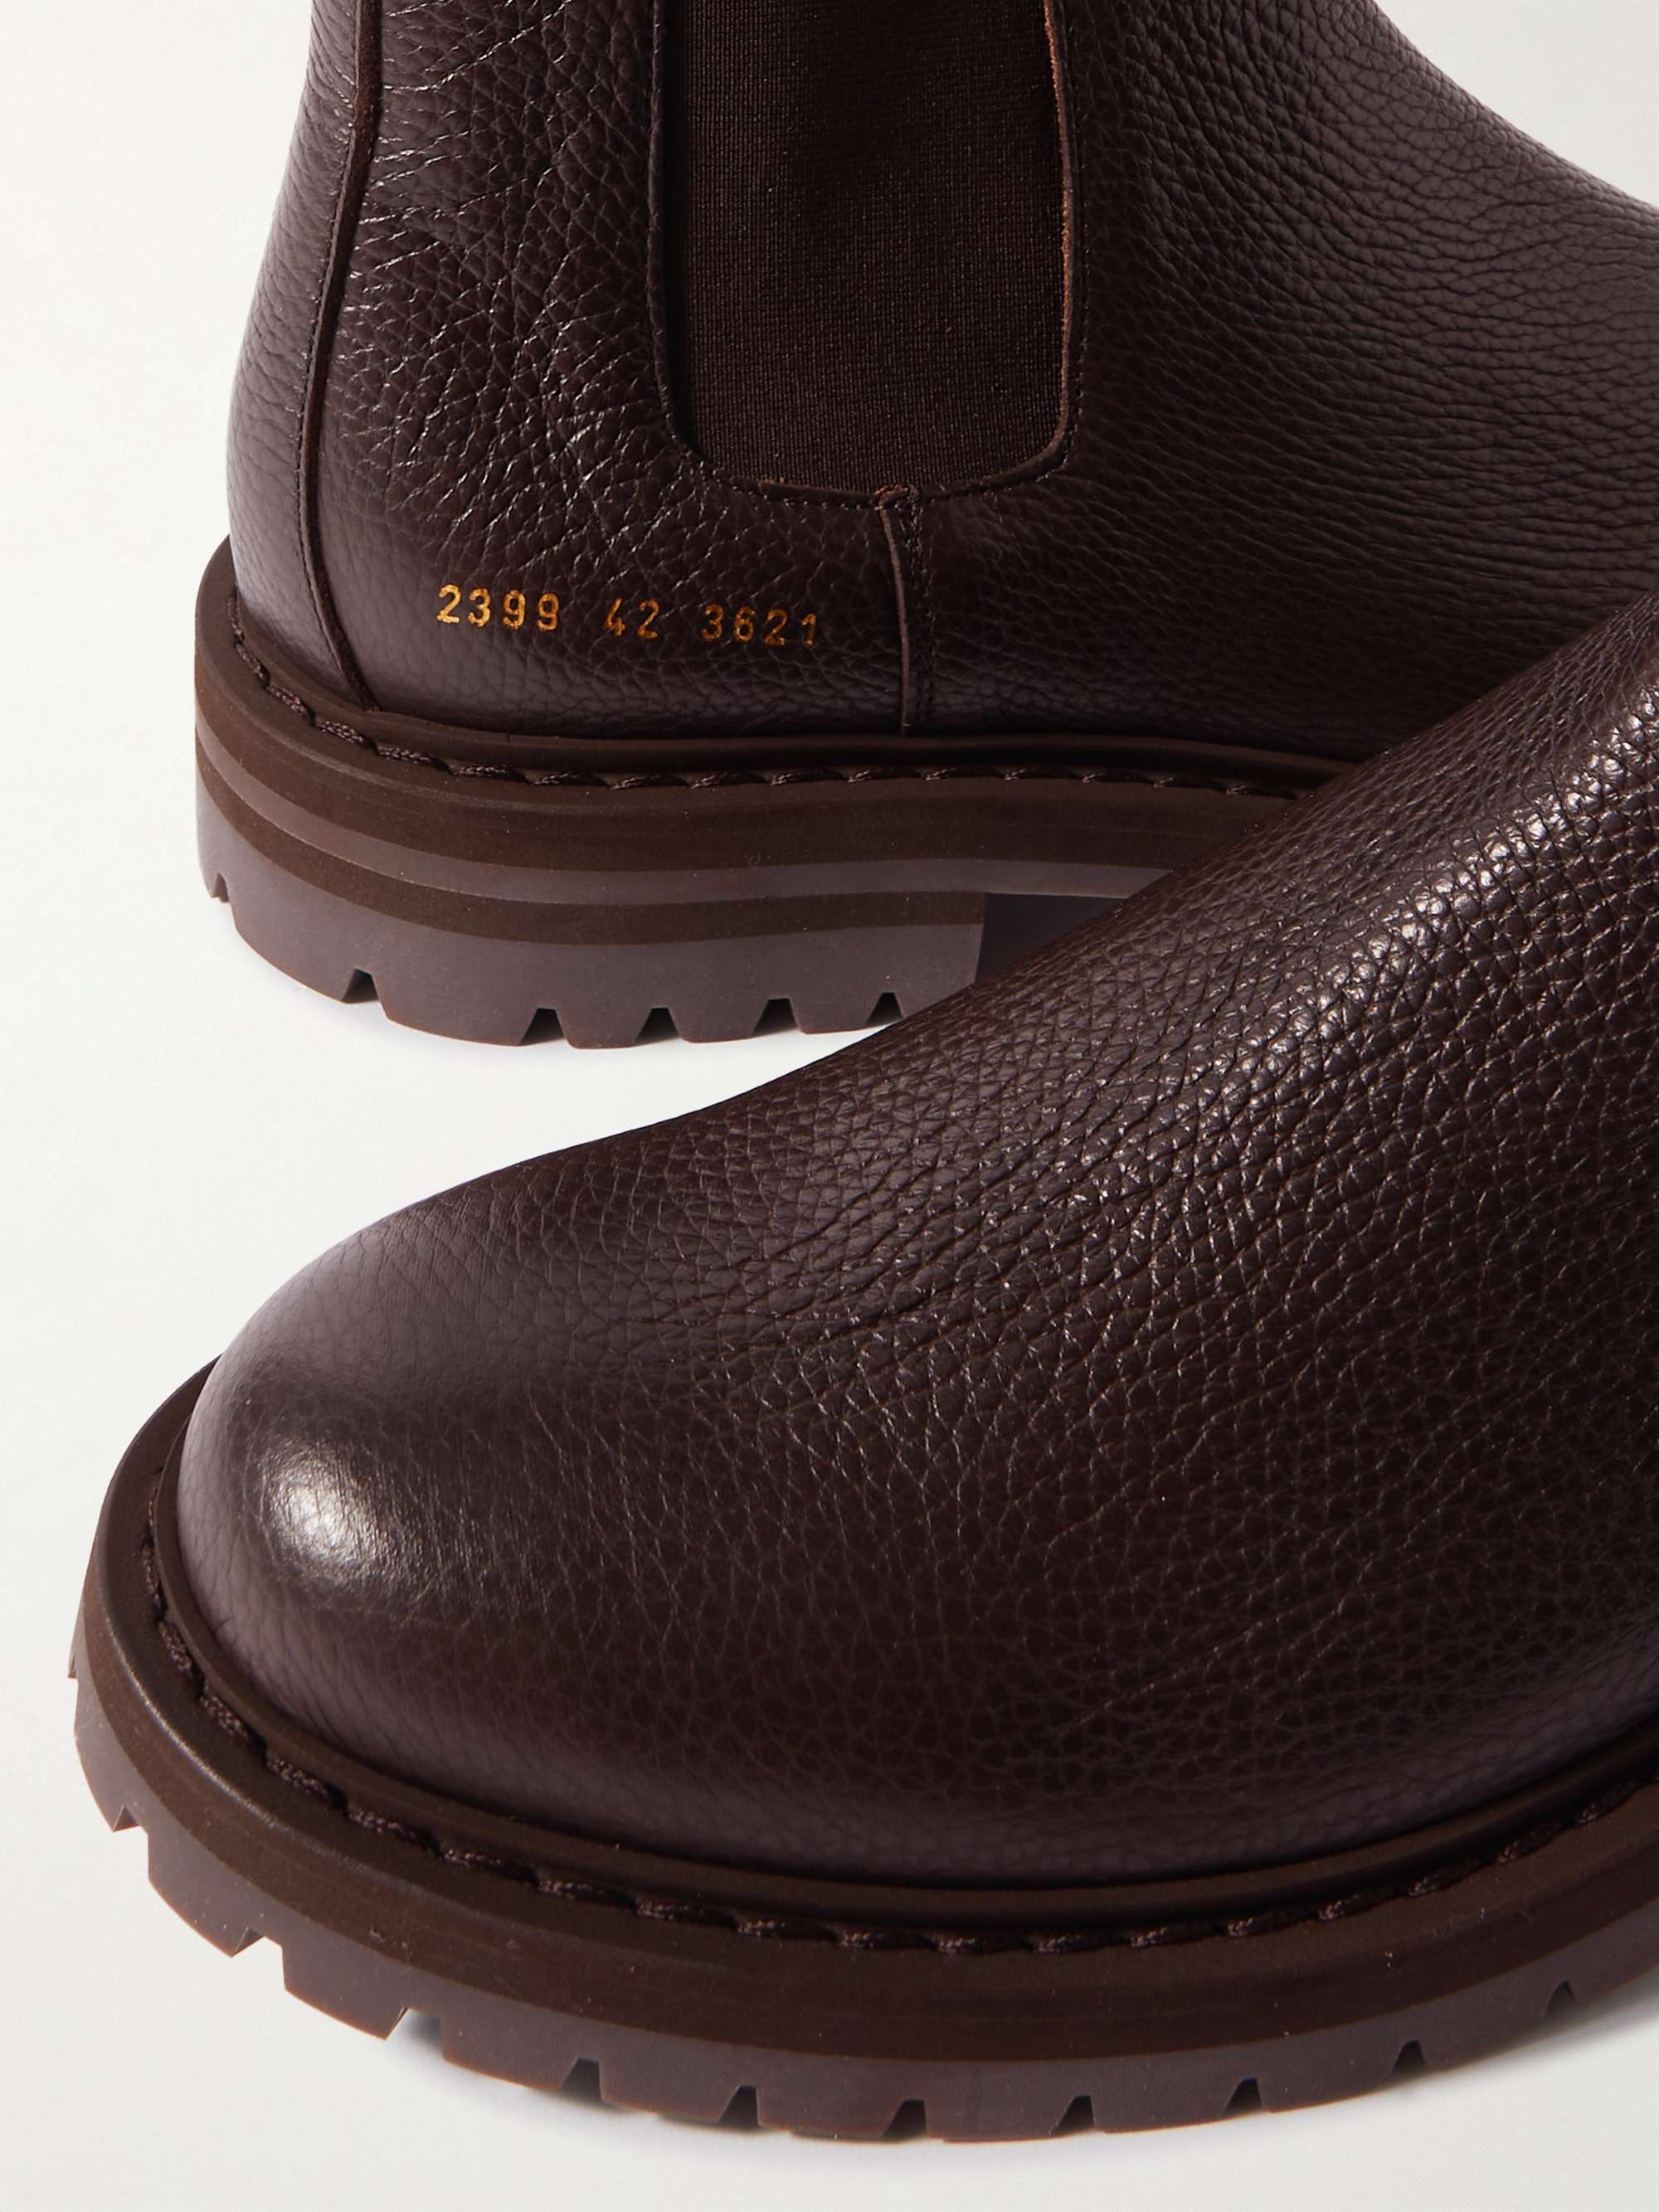 COMMON PROJECTS Full-Grain Leather Chelsea Boots for Men | MR PORTER